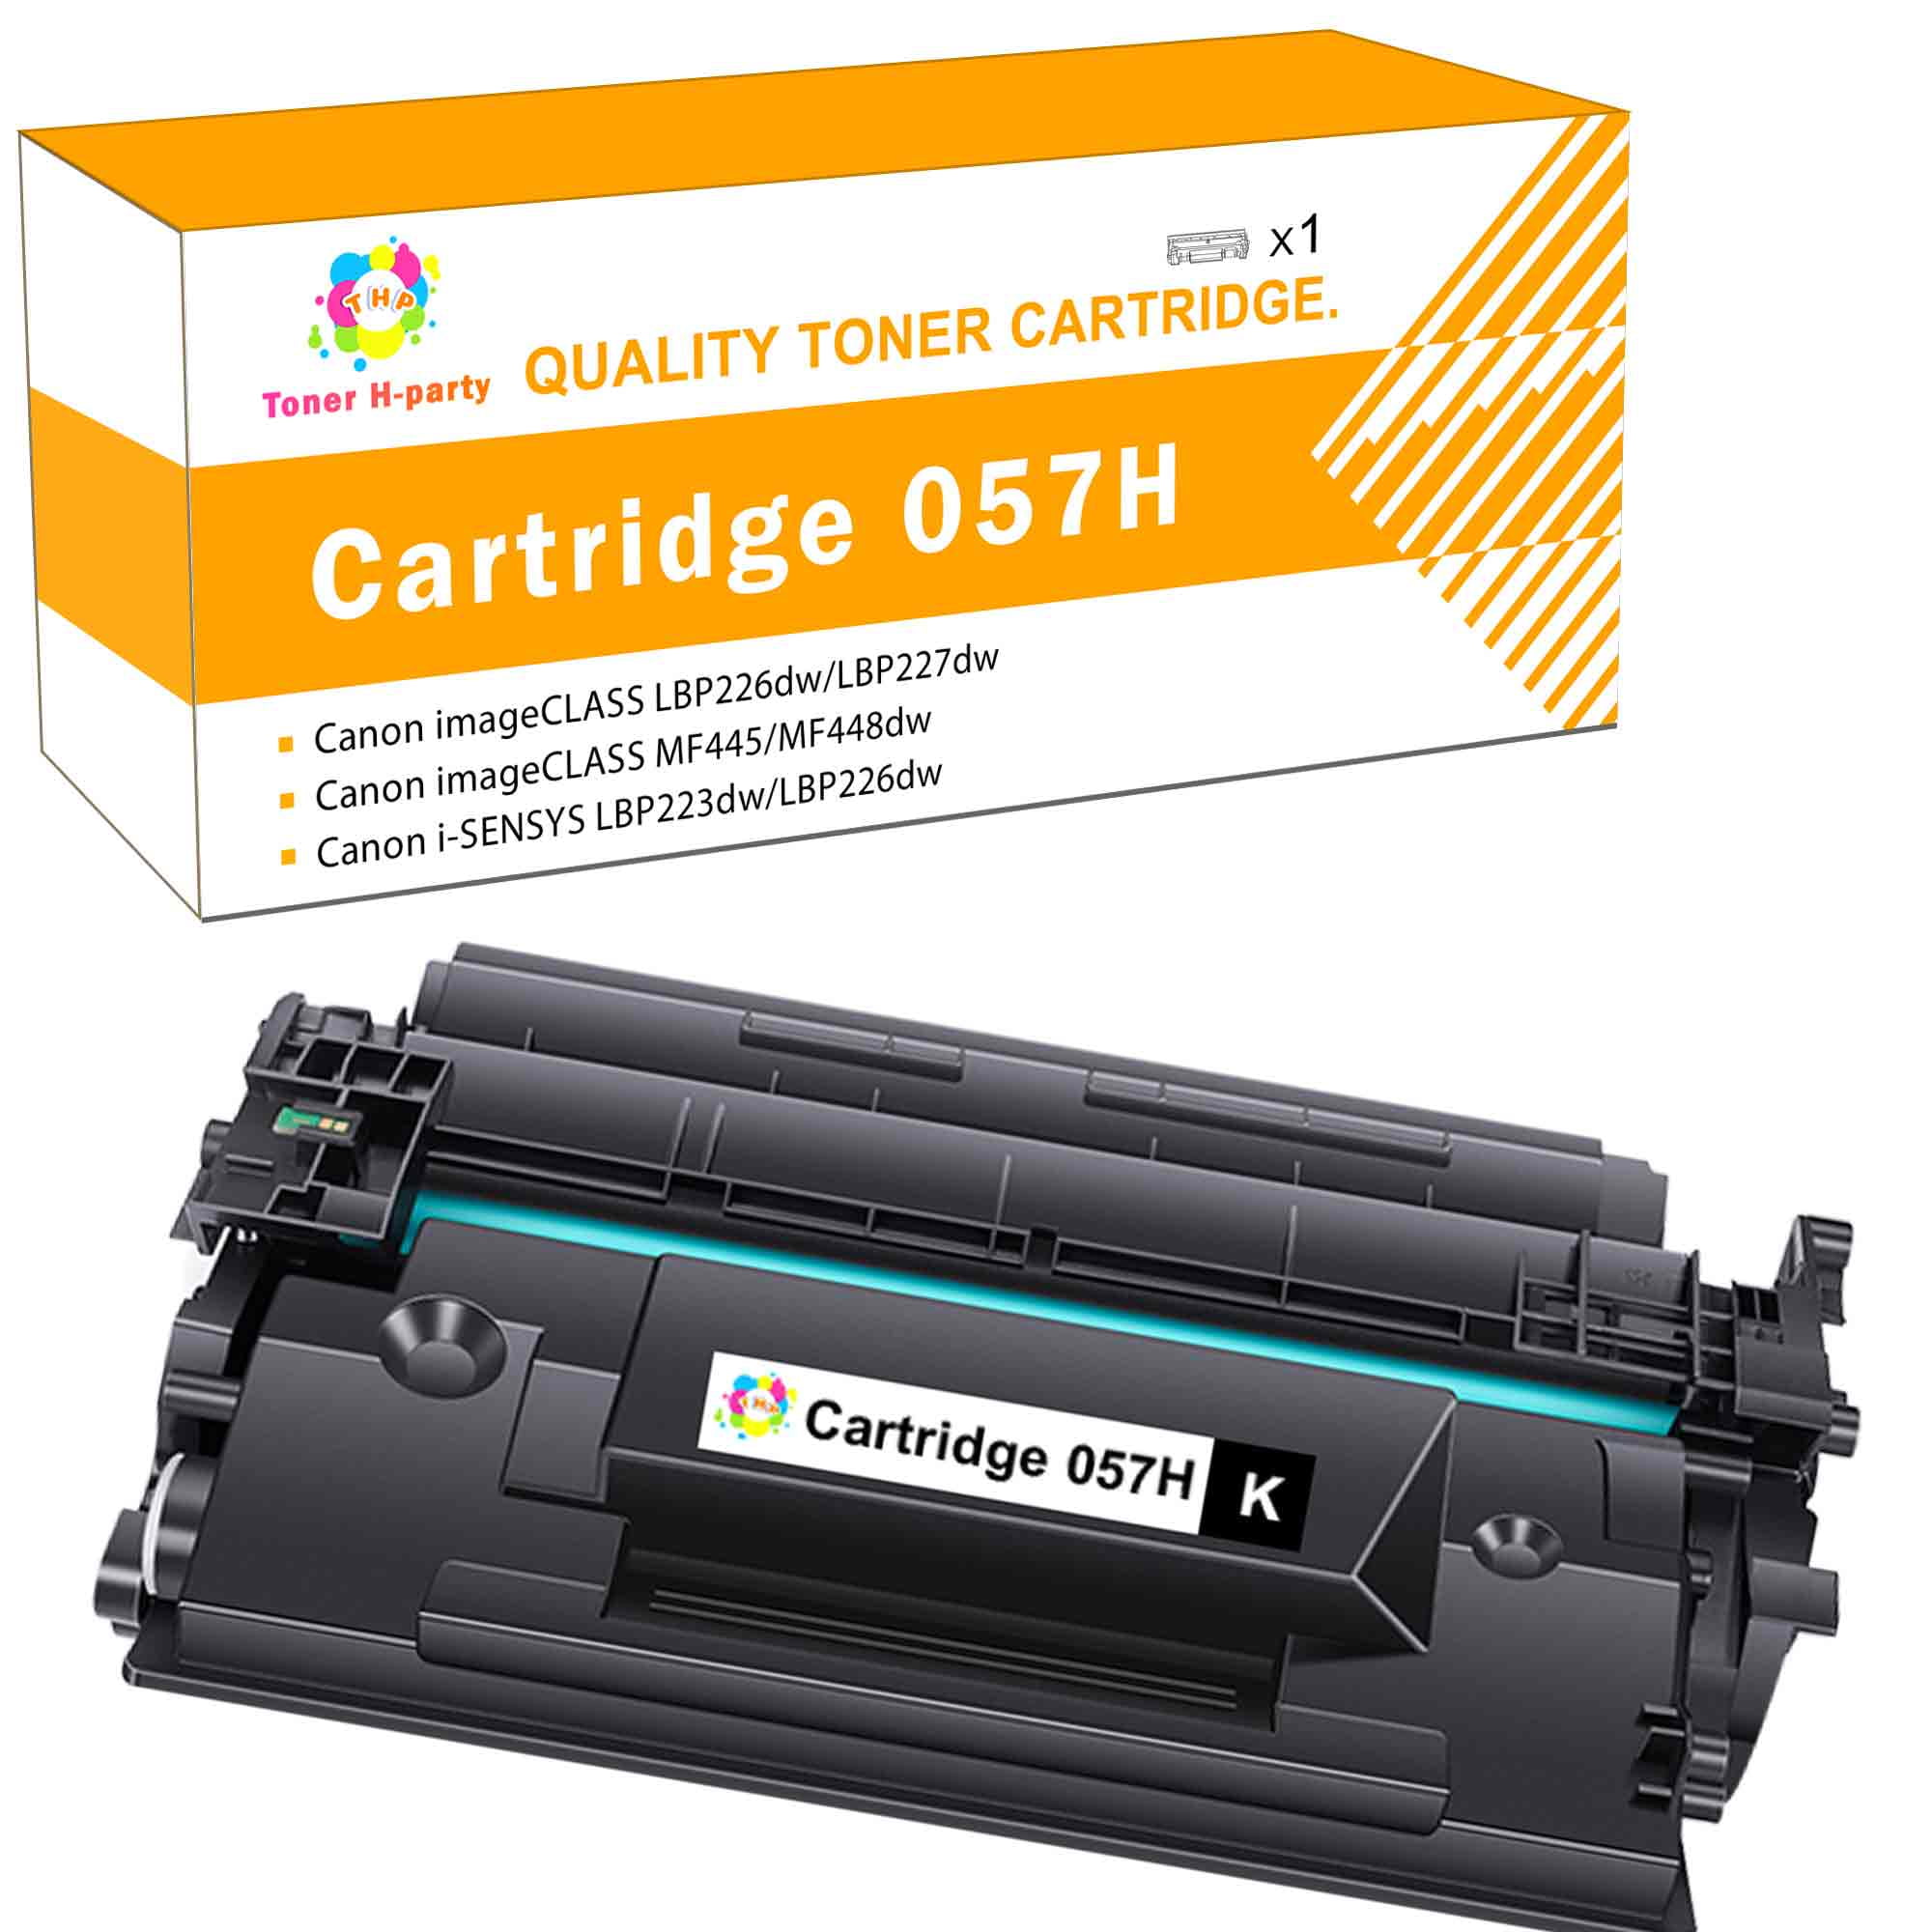 Toner H-Party Compatible Toner Cartridge with Chip for Canon 057H 057 CRG- 057H Work with imageCLASS LBP227dw LBP226dw MF448dw MF445 MF449dw LBP223dw  Laser Printer (Black, 1-Pack) 